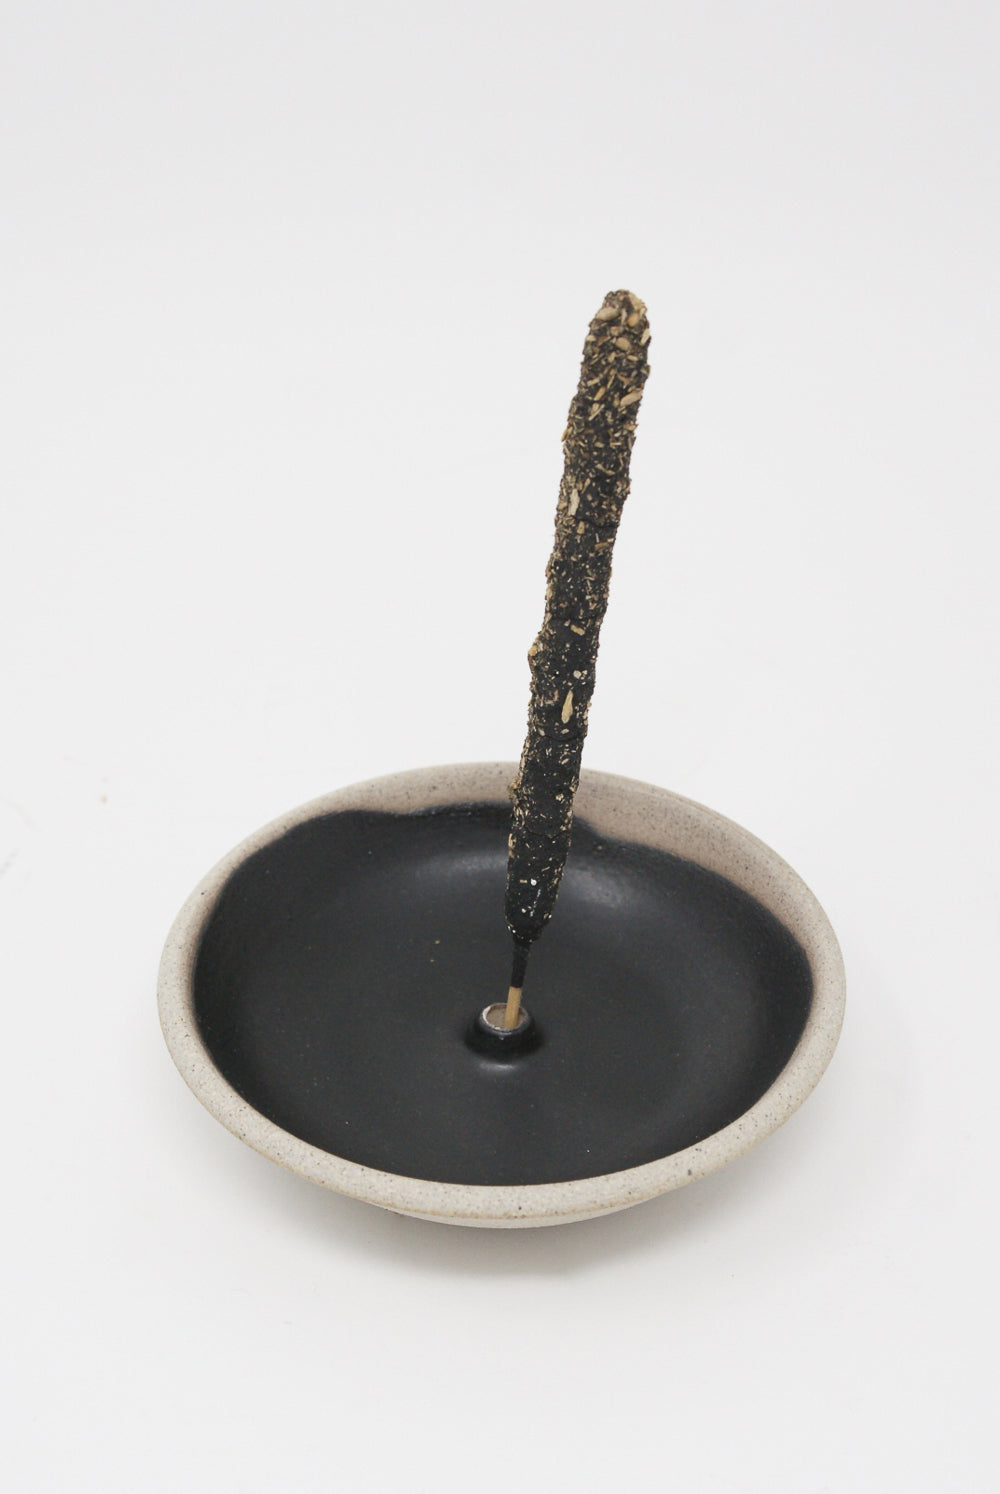 Incausa - Stoneware Incense Holder in Black with incense